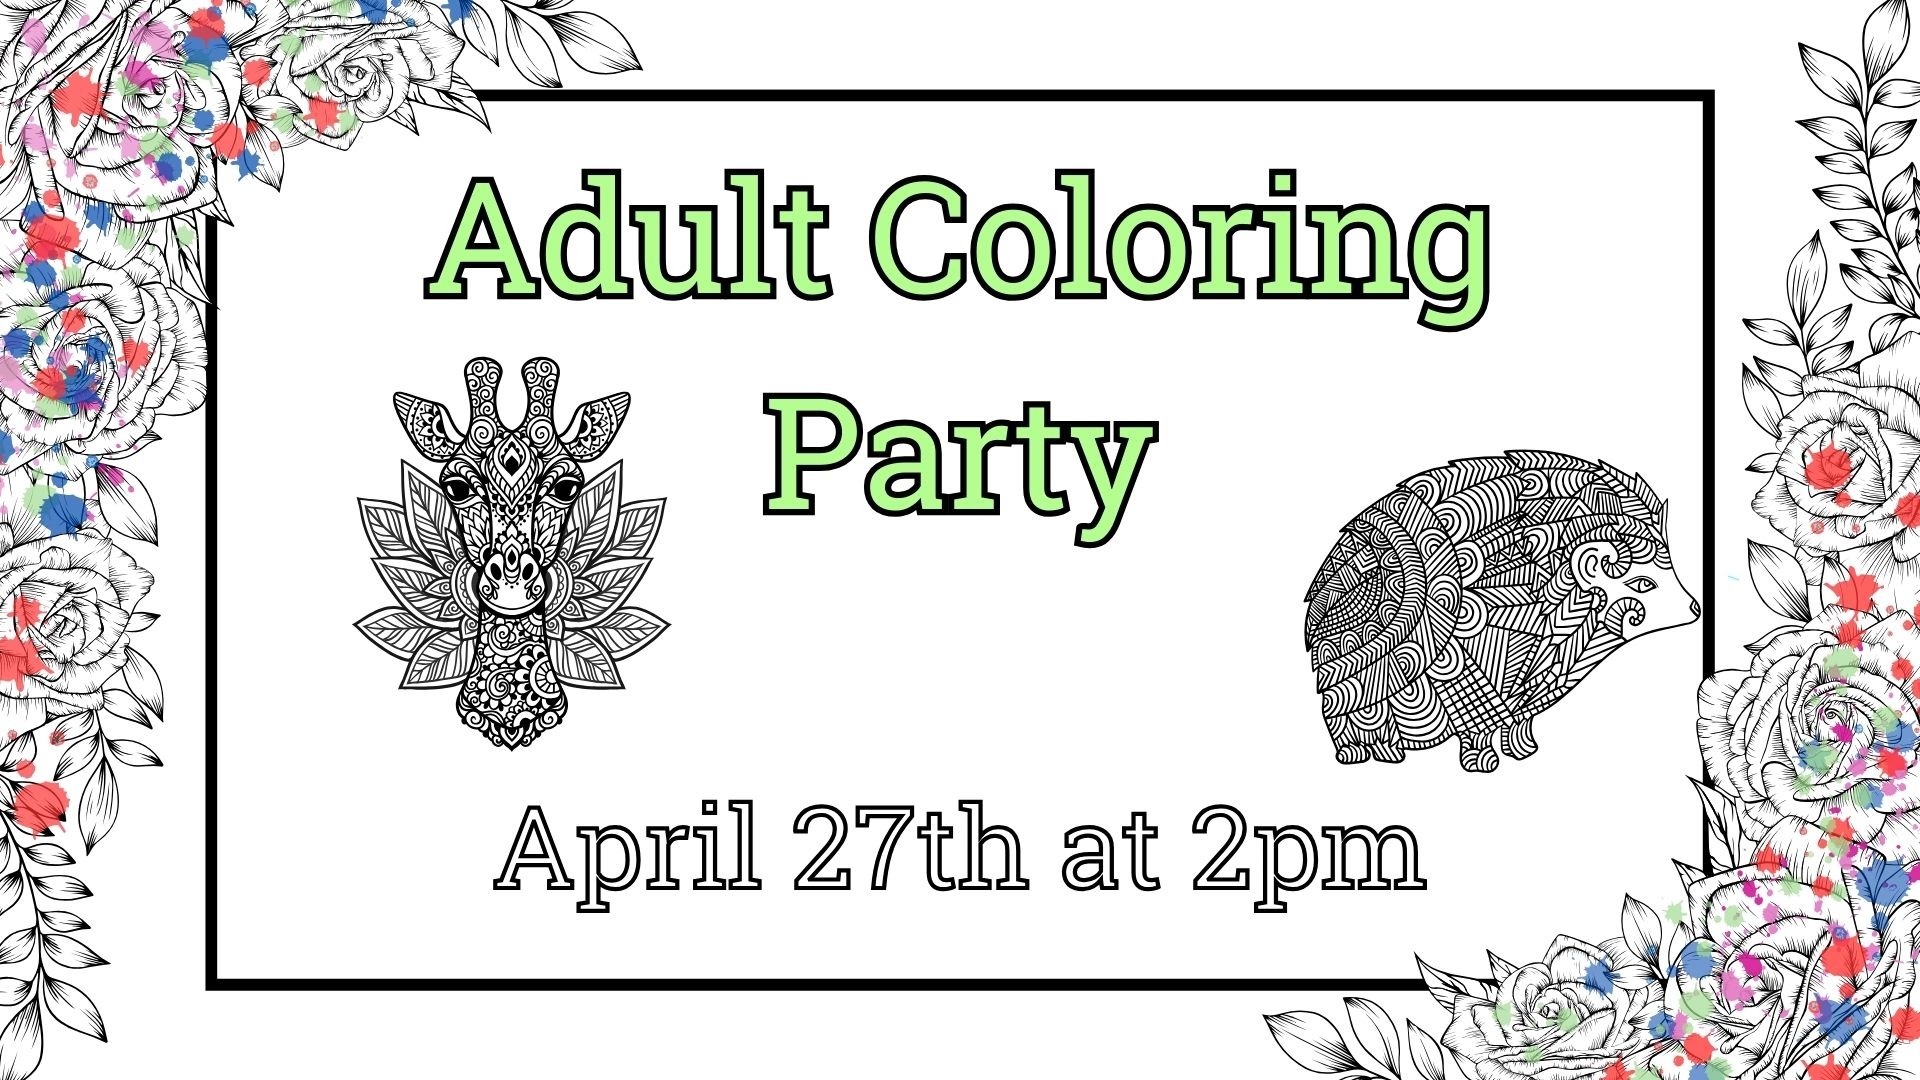 Adult Coloring Party